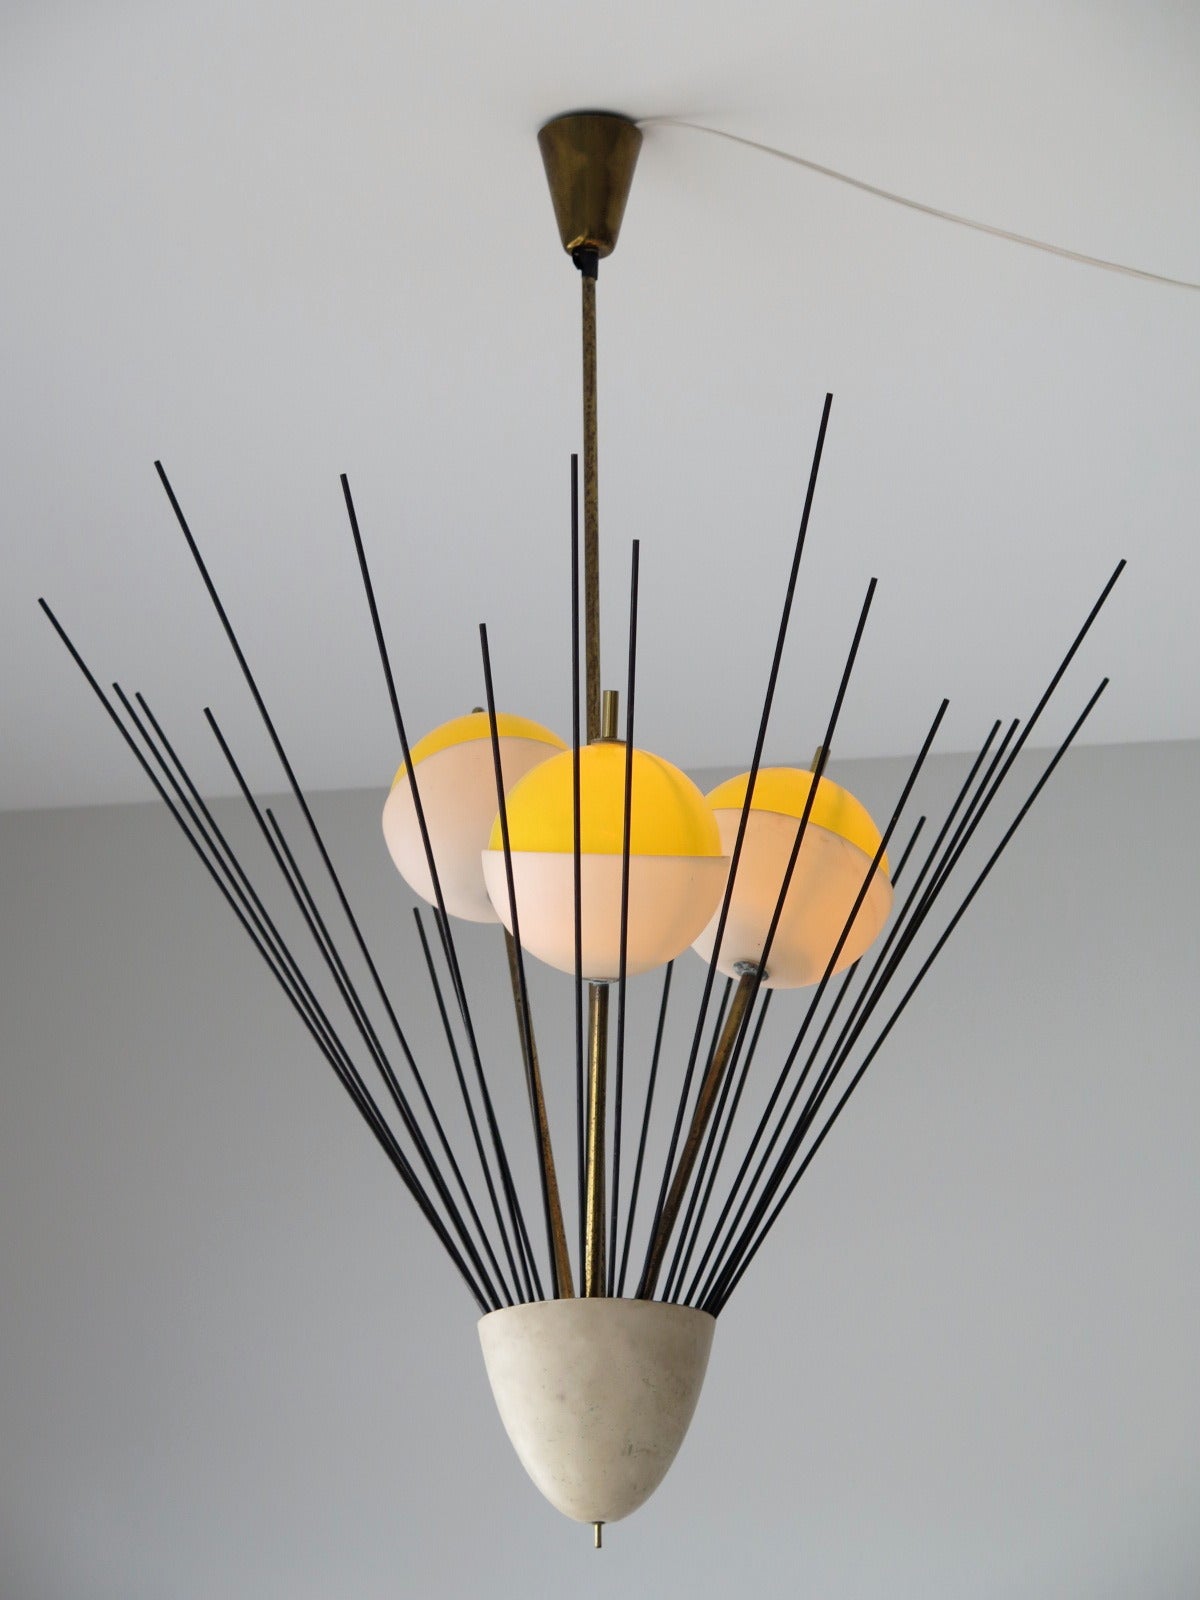 An unusual chandelier by Arredoluce with interesting 